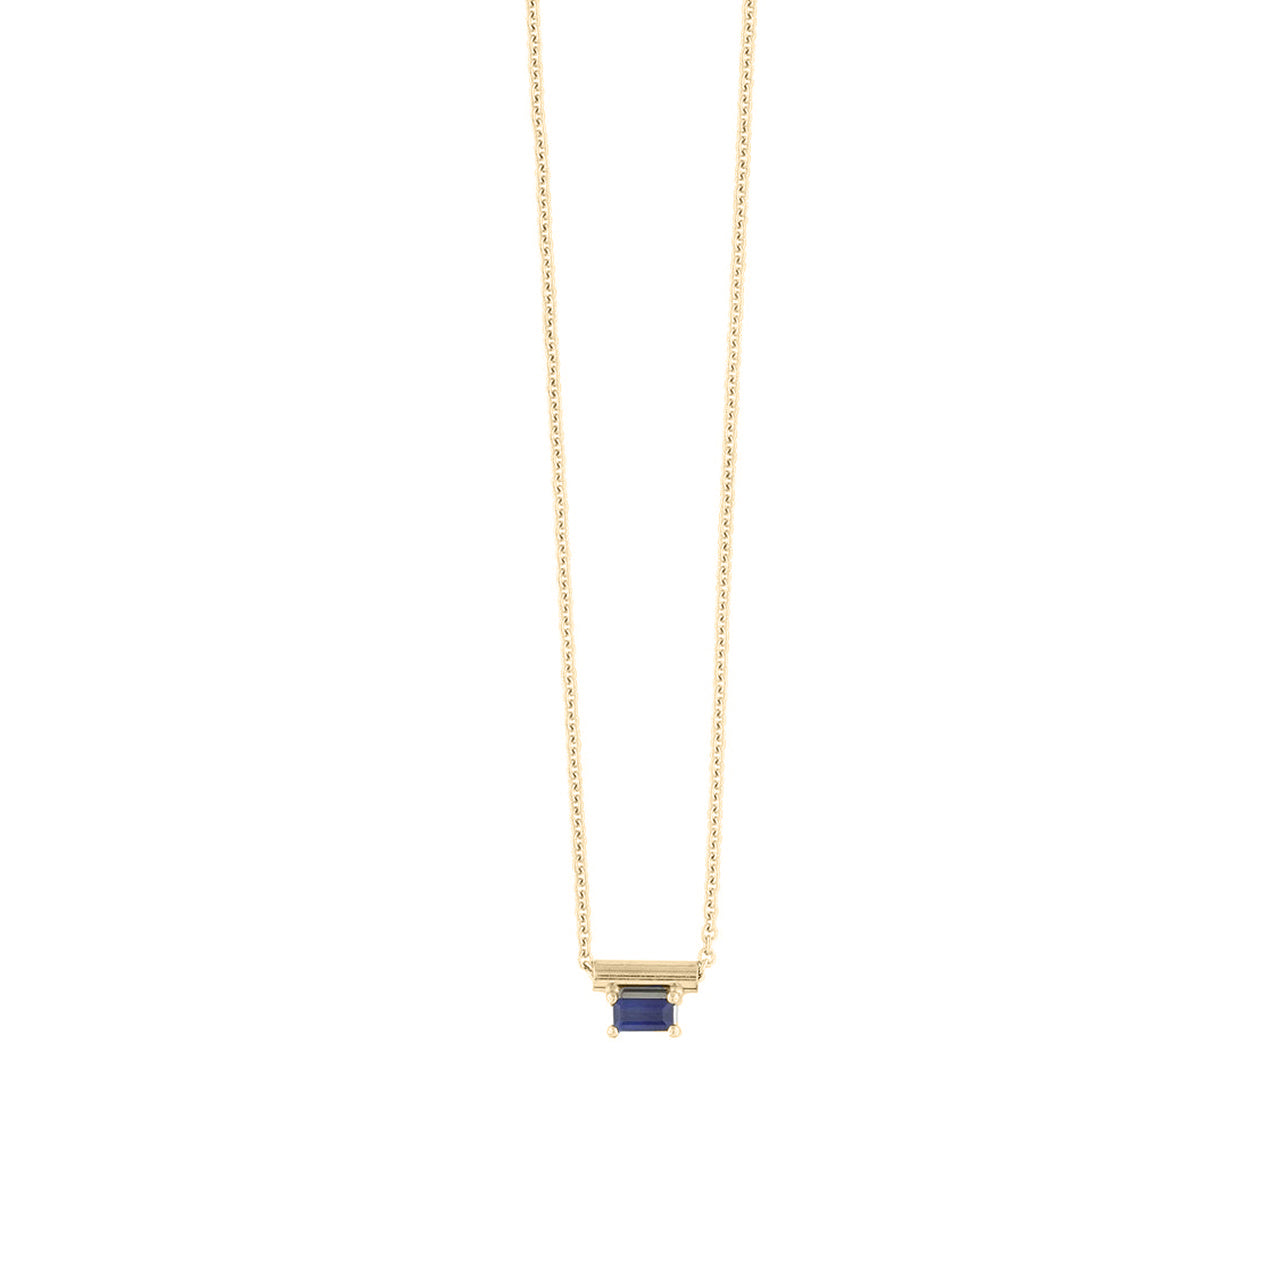 18 carat yellow gold nora necklace